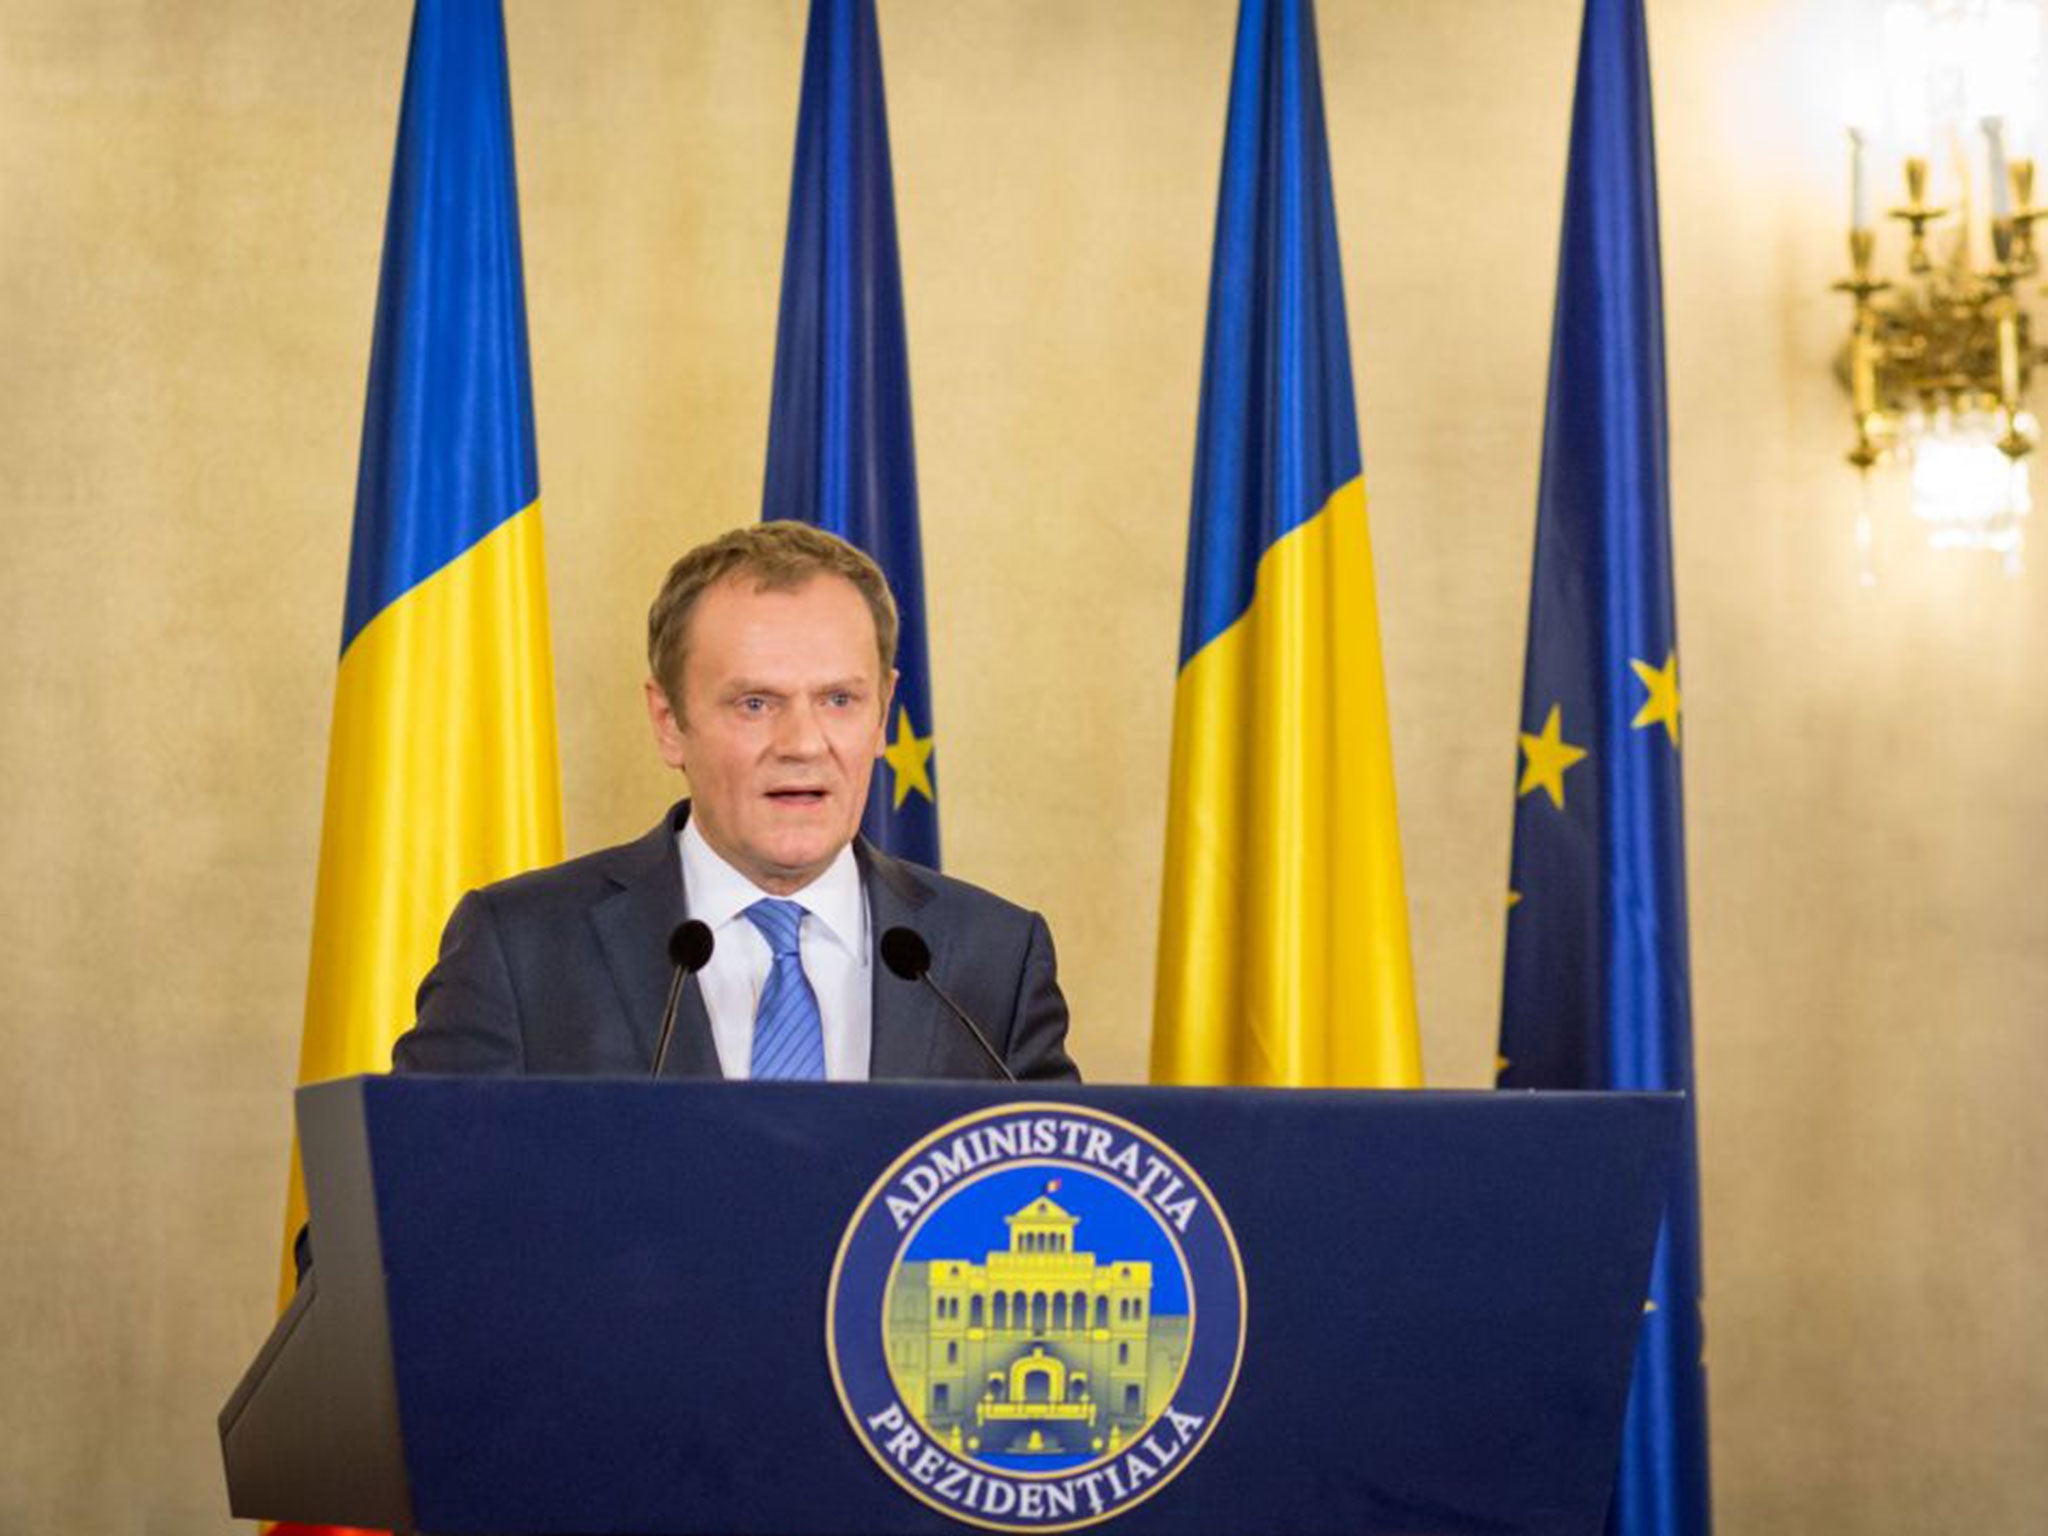 European Council President Donald Tusk was speaking in Bucharest, in Romania for talks with the President Klaus Iohannis